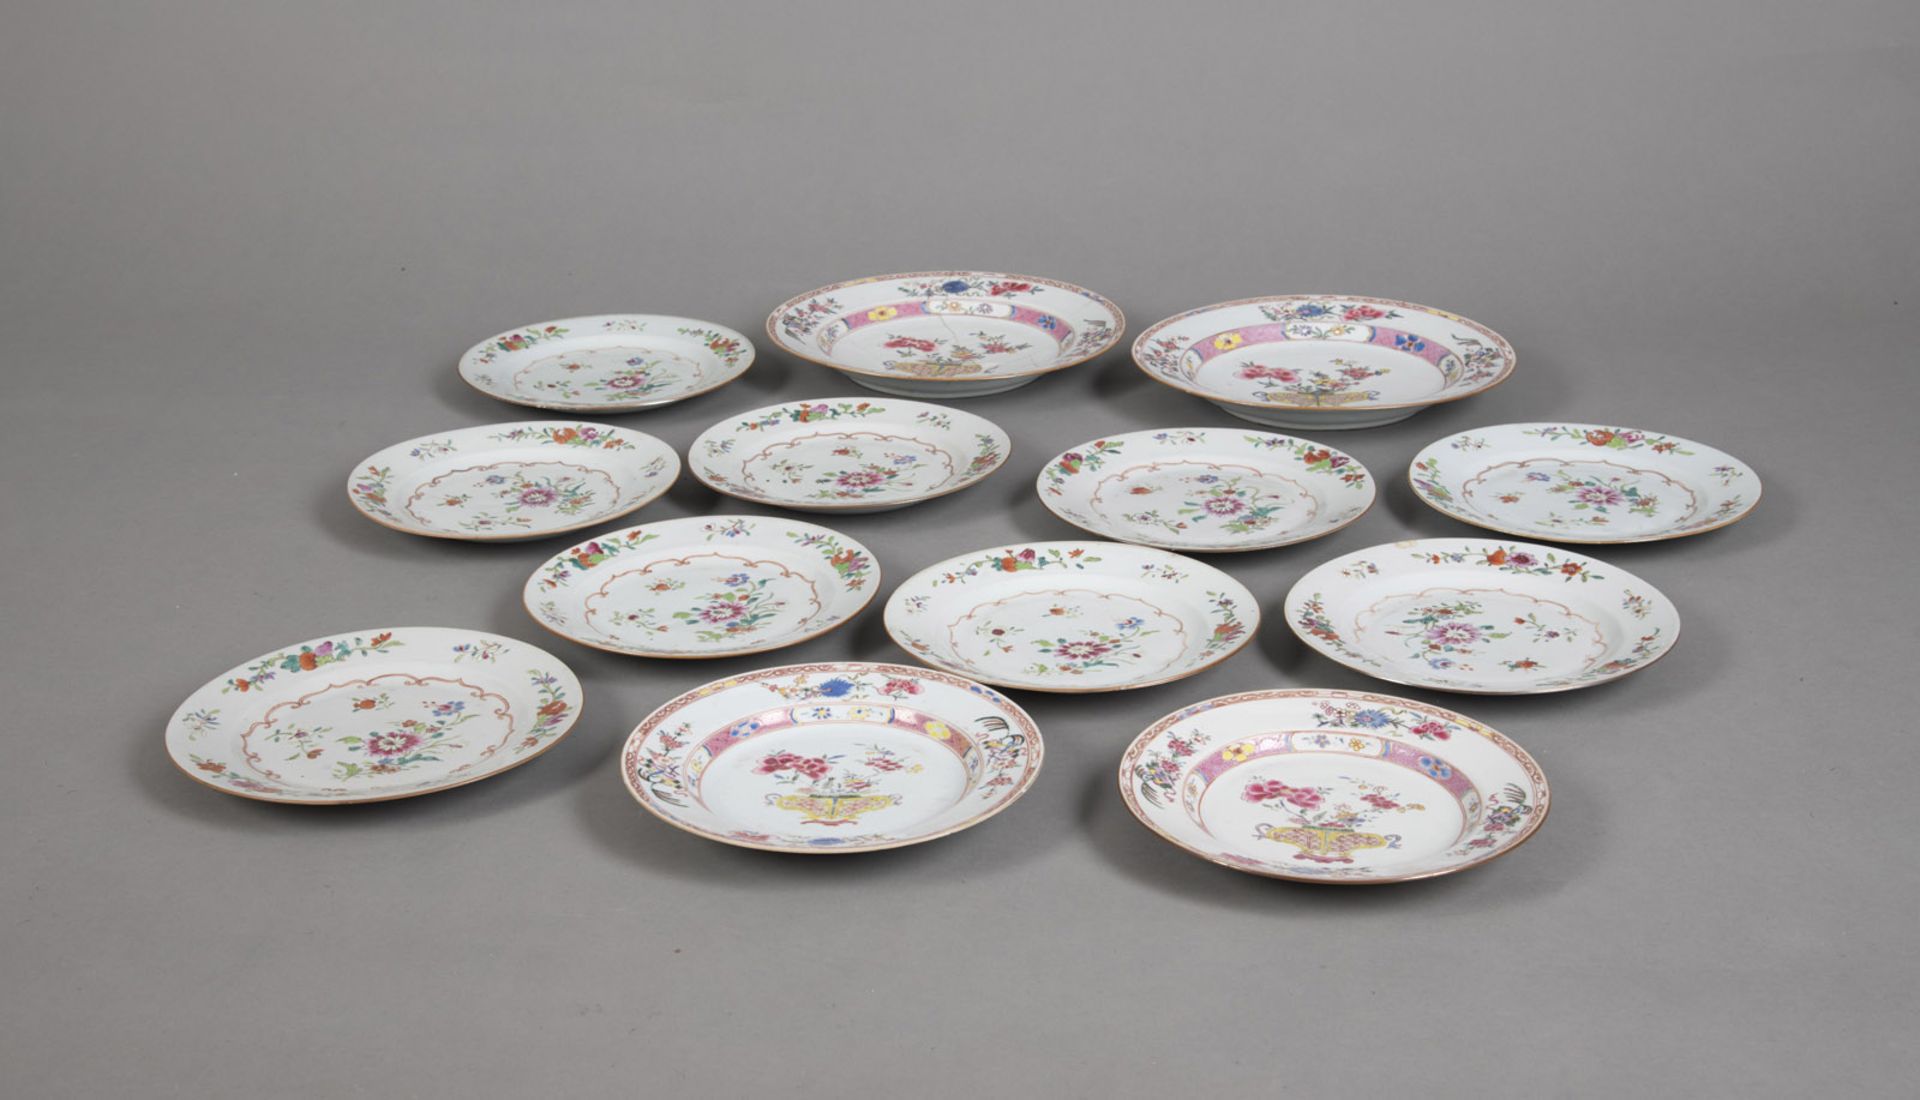 TWO LARGE AND ELEVEN SMALLER 'FAMILLE ROSE' EXPORT PORCELAIN DISHES - Image 2 of 3